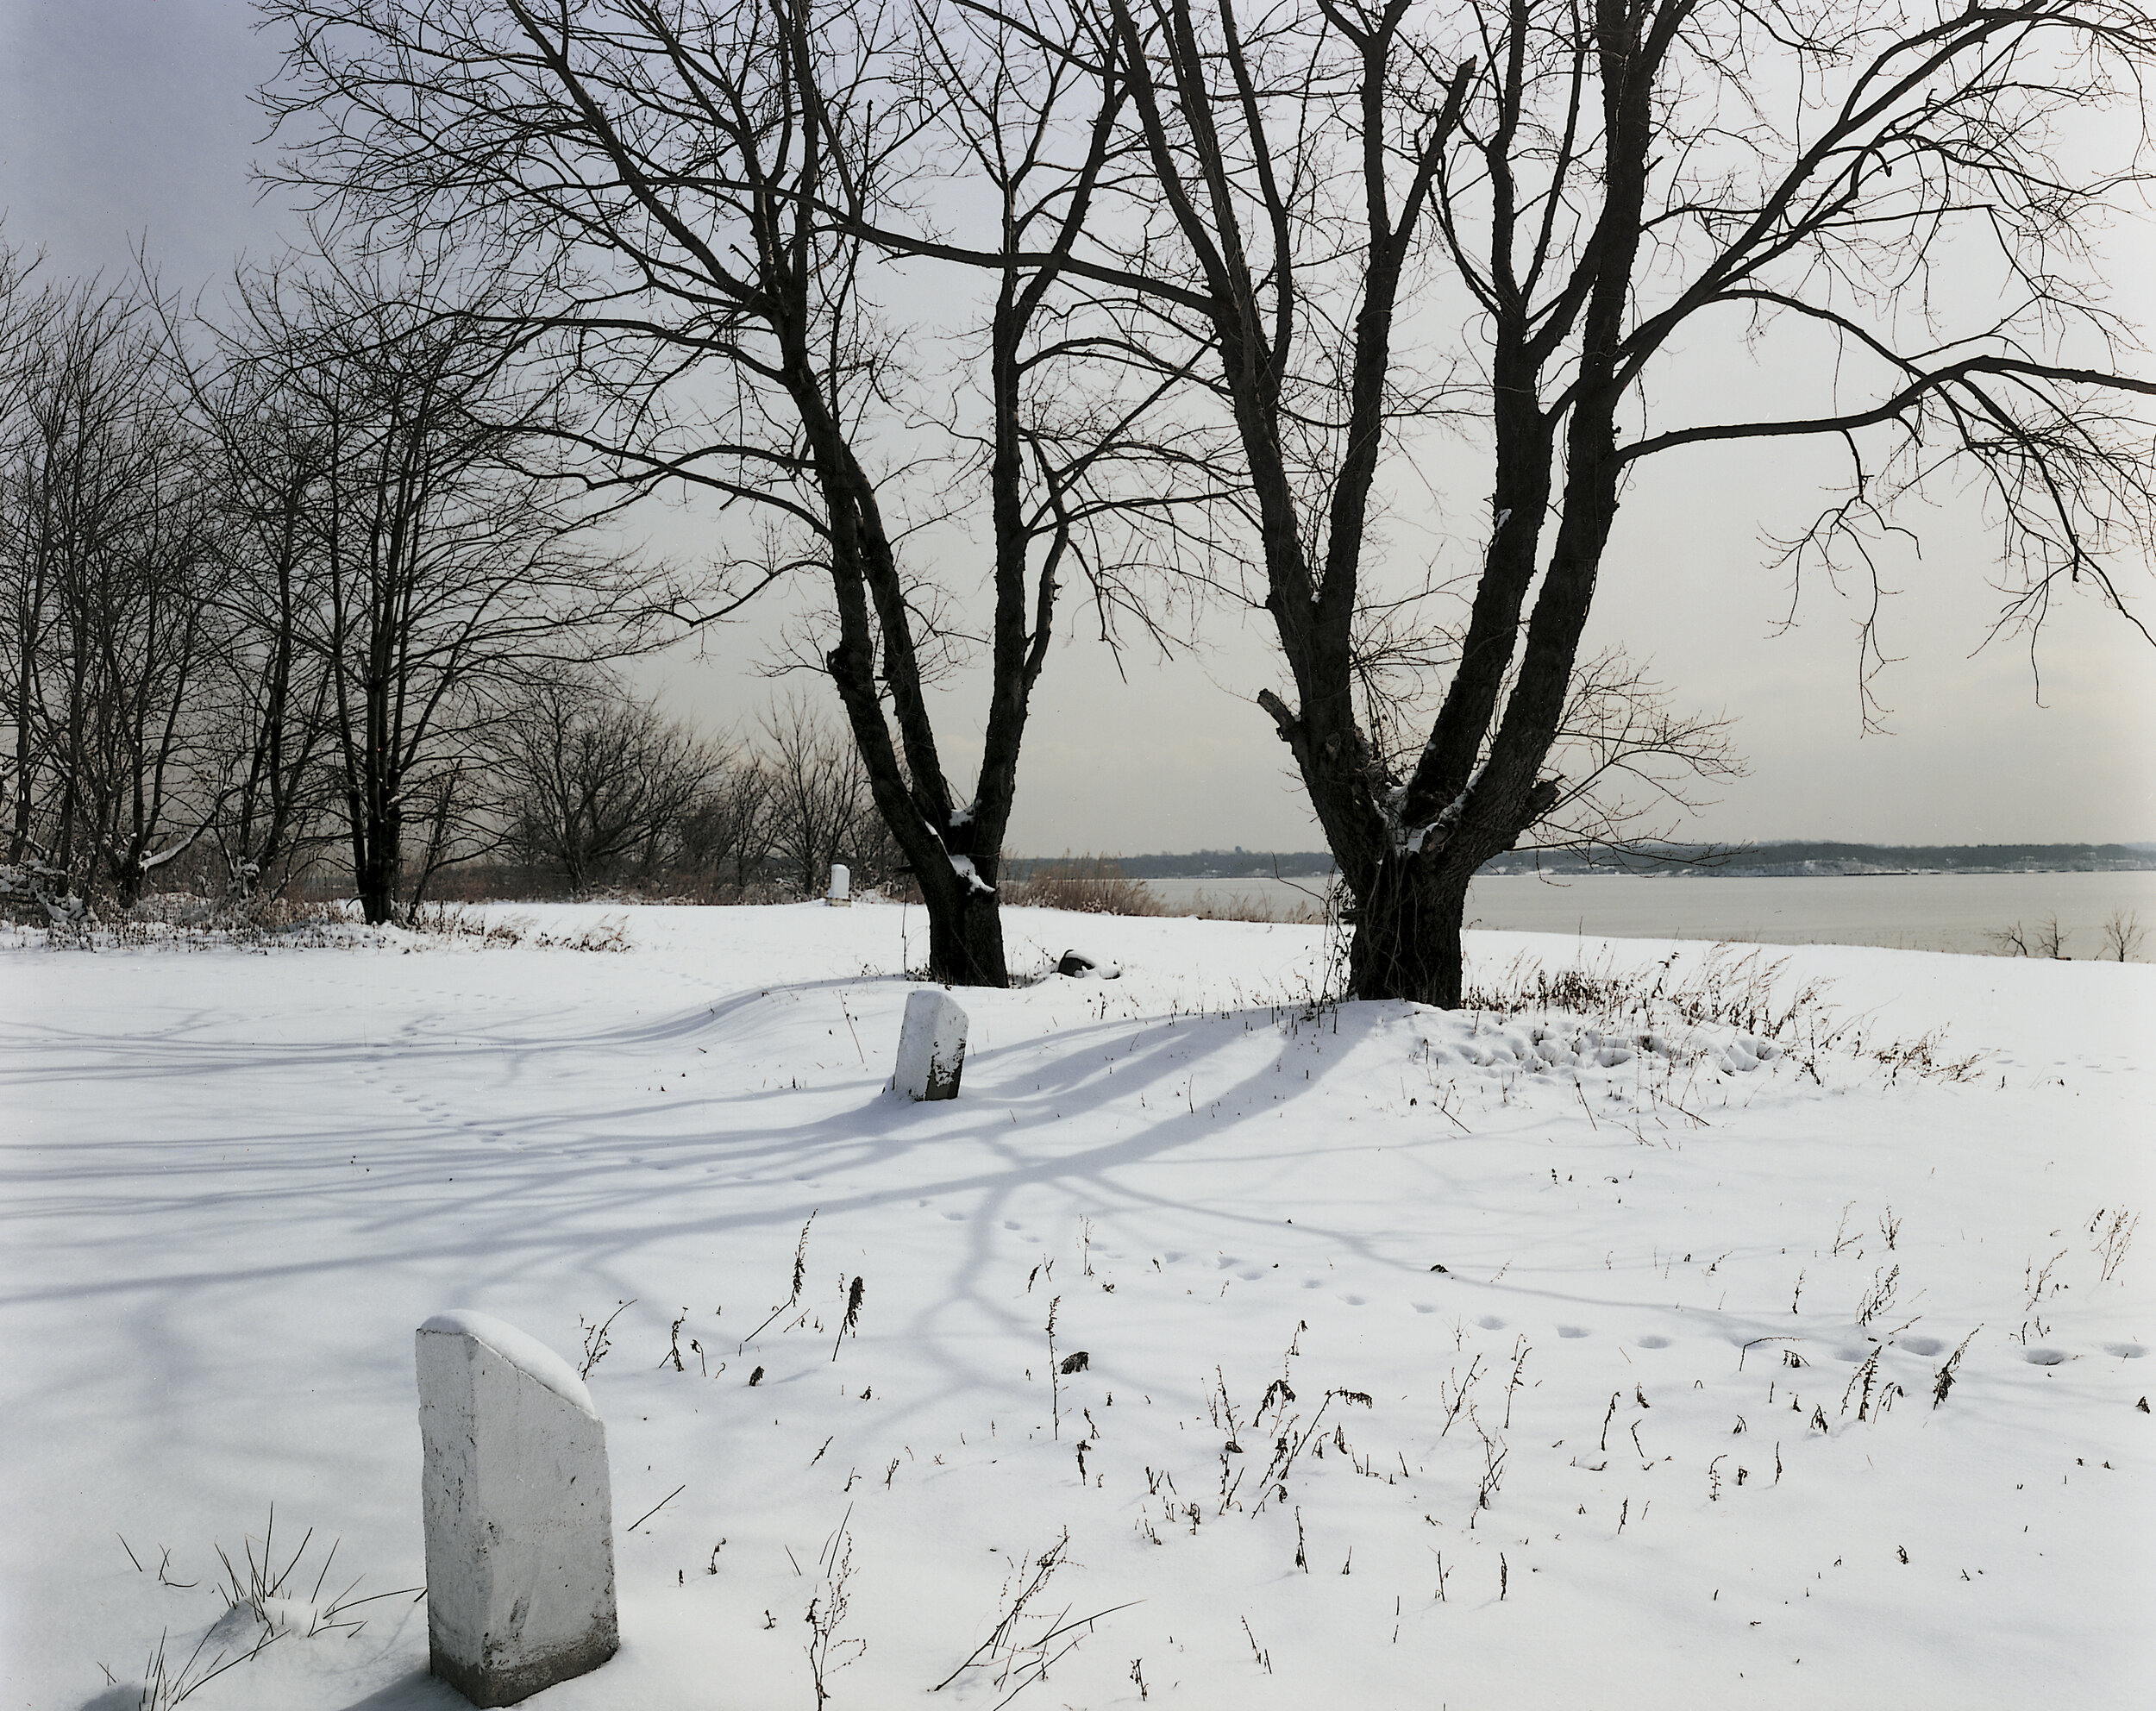 Looking northeast from Cemetery Hill toward Long Island Sound after a snowfall, February 1993